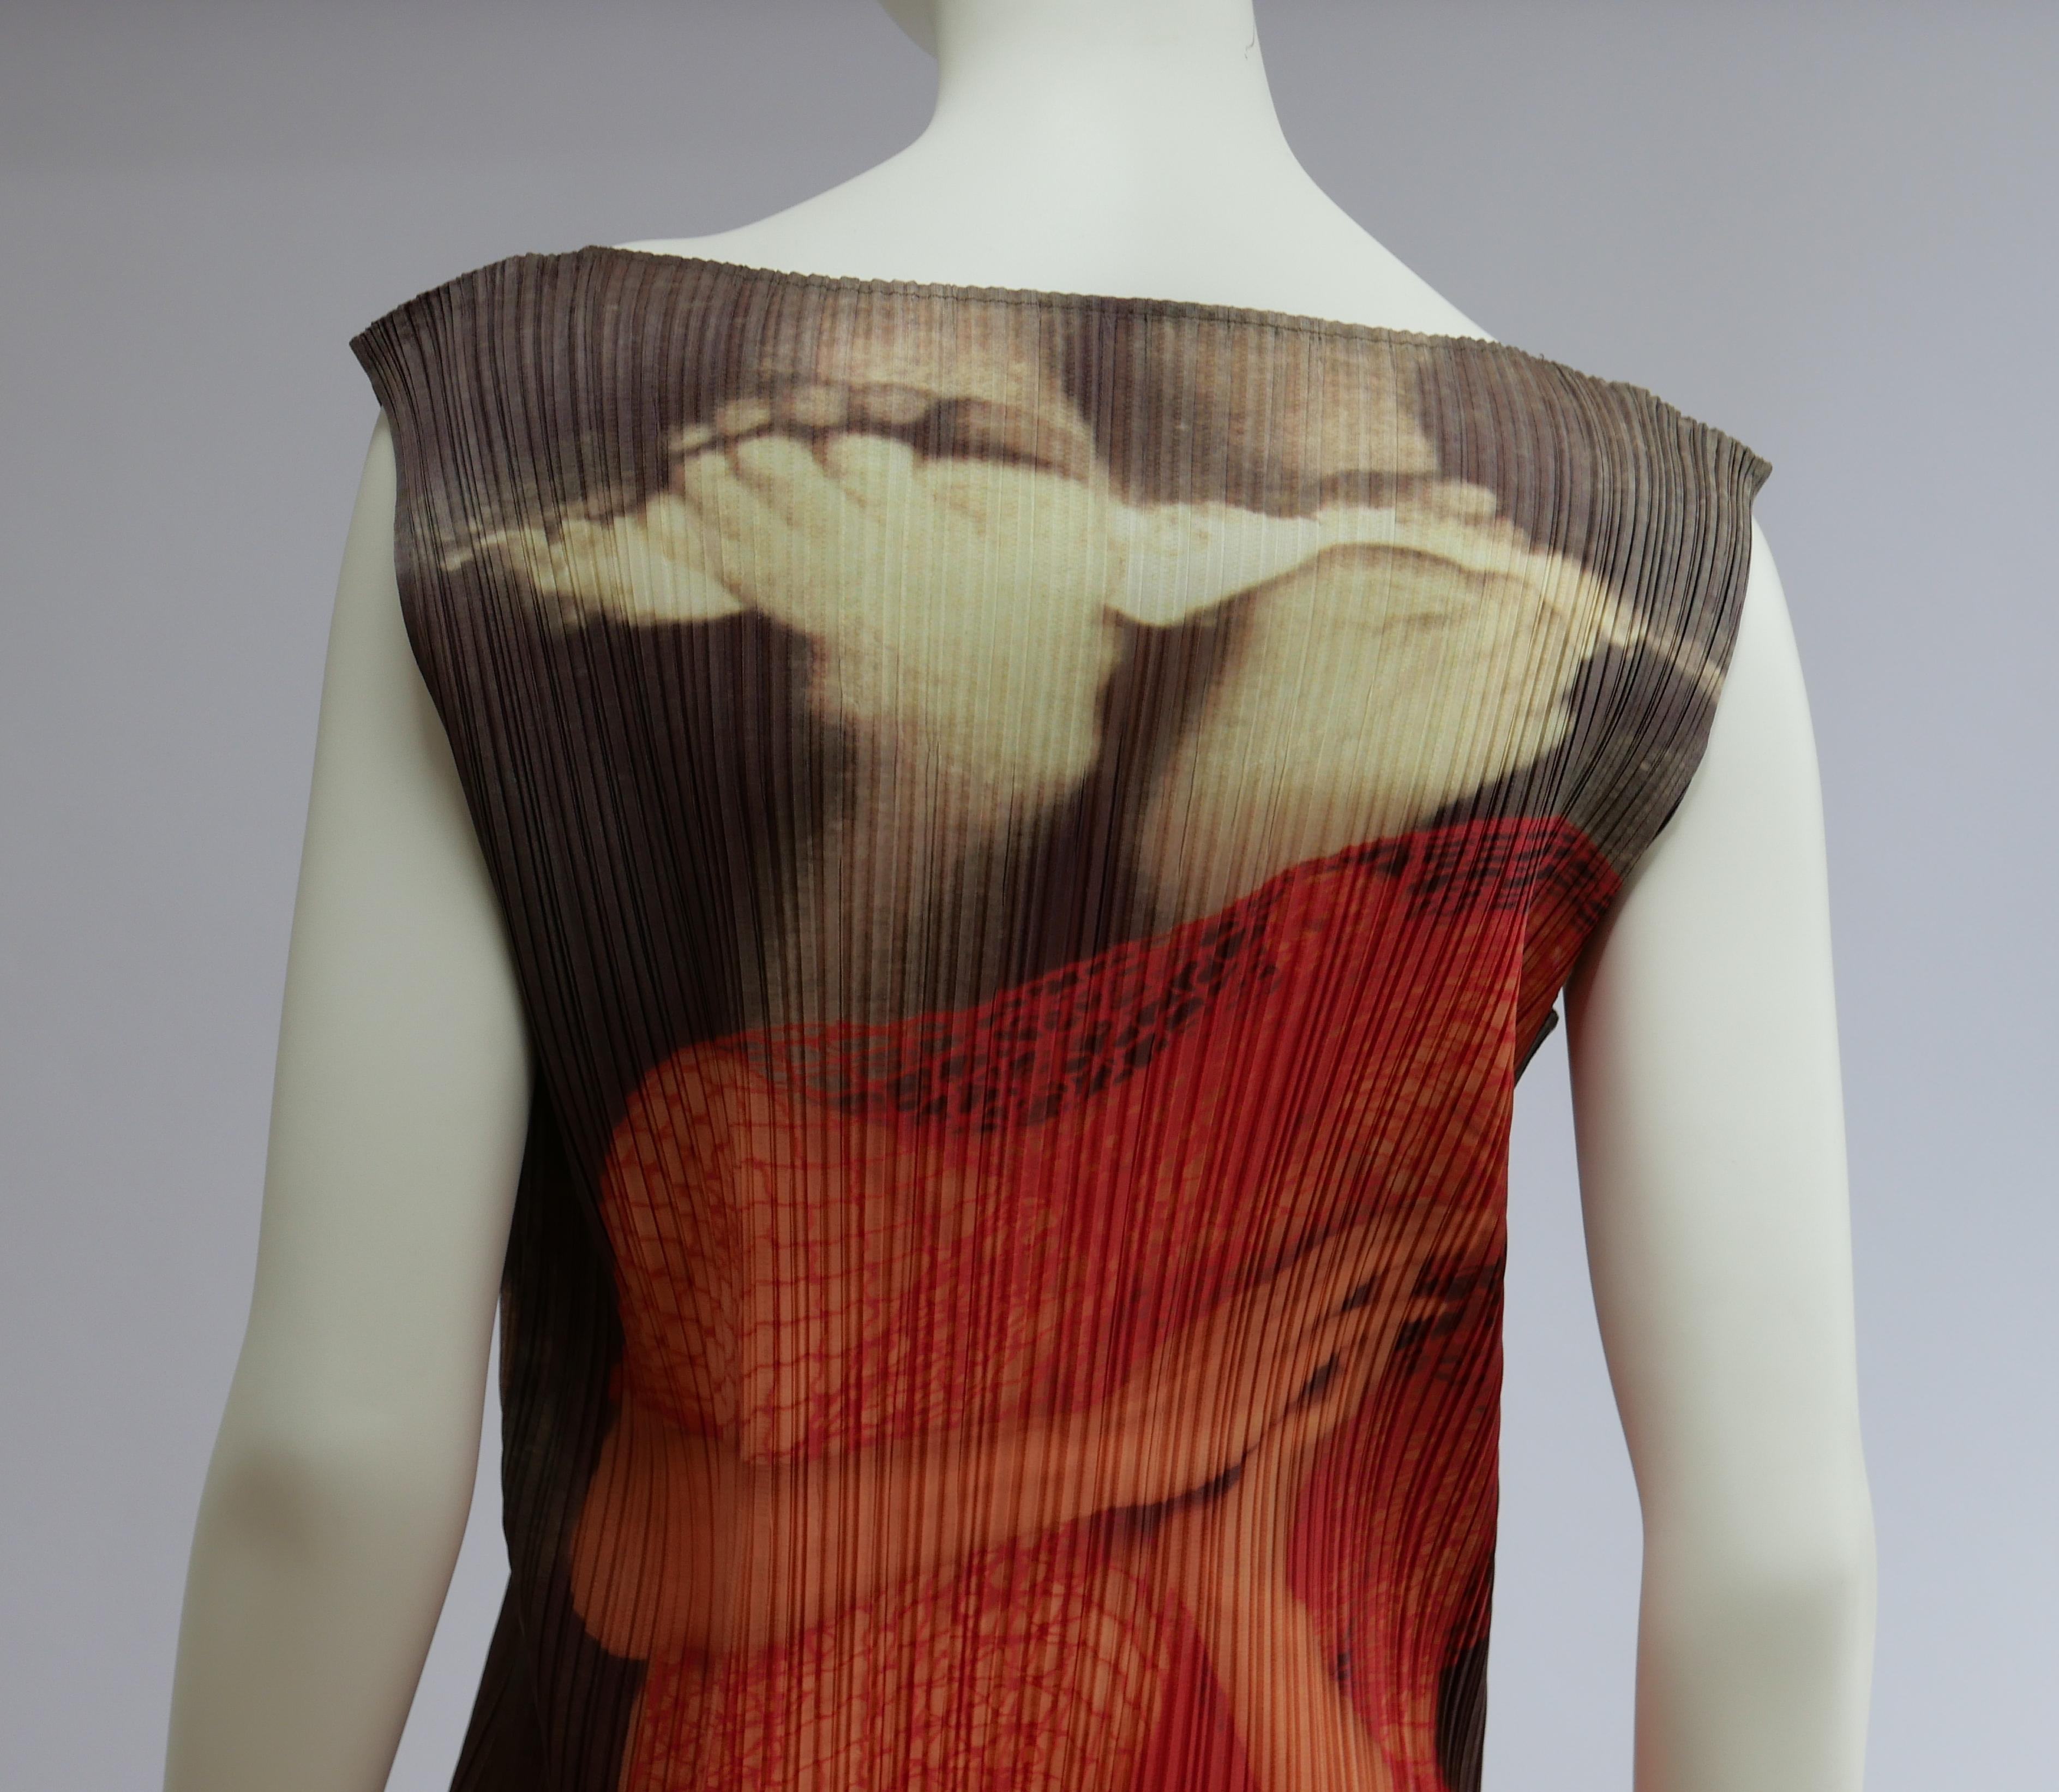 ISSEY MIYAKE Dress Guest Artist Yasumasa Morimura Series No.1  In Good Condition For Sale In London, GB